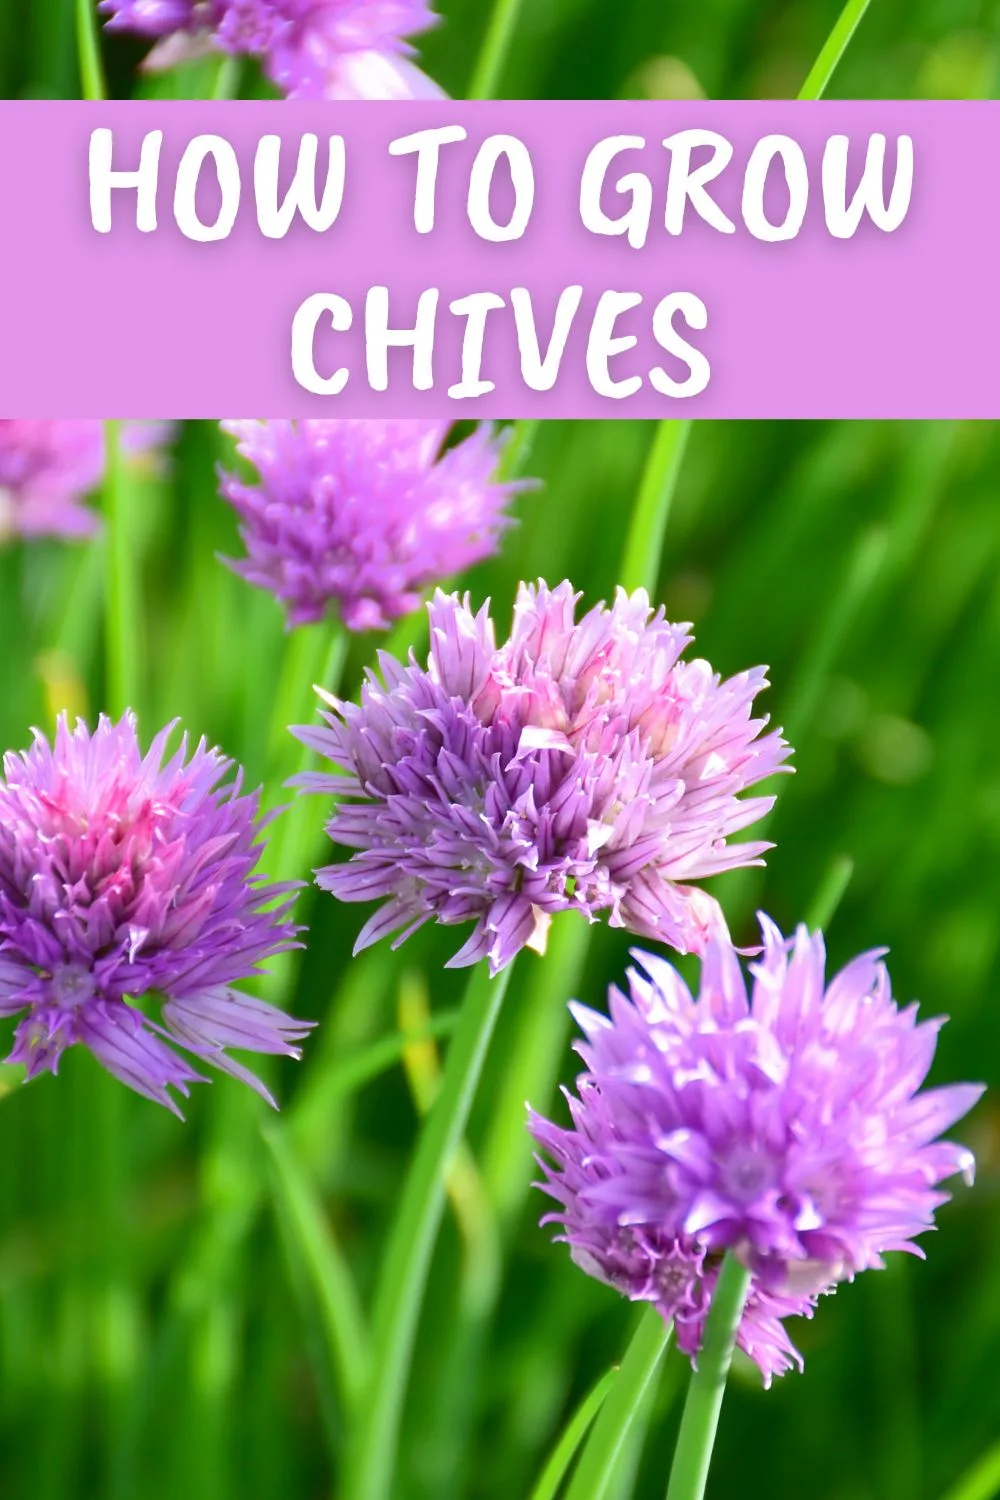 How to grow chives.